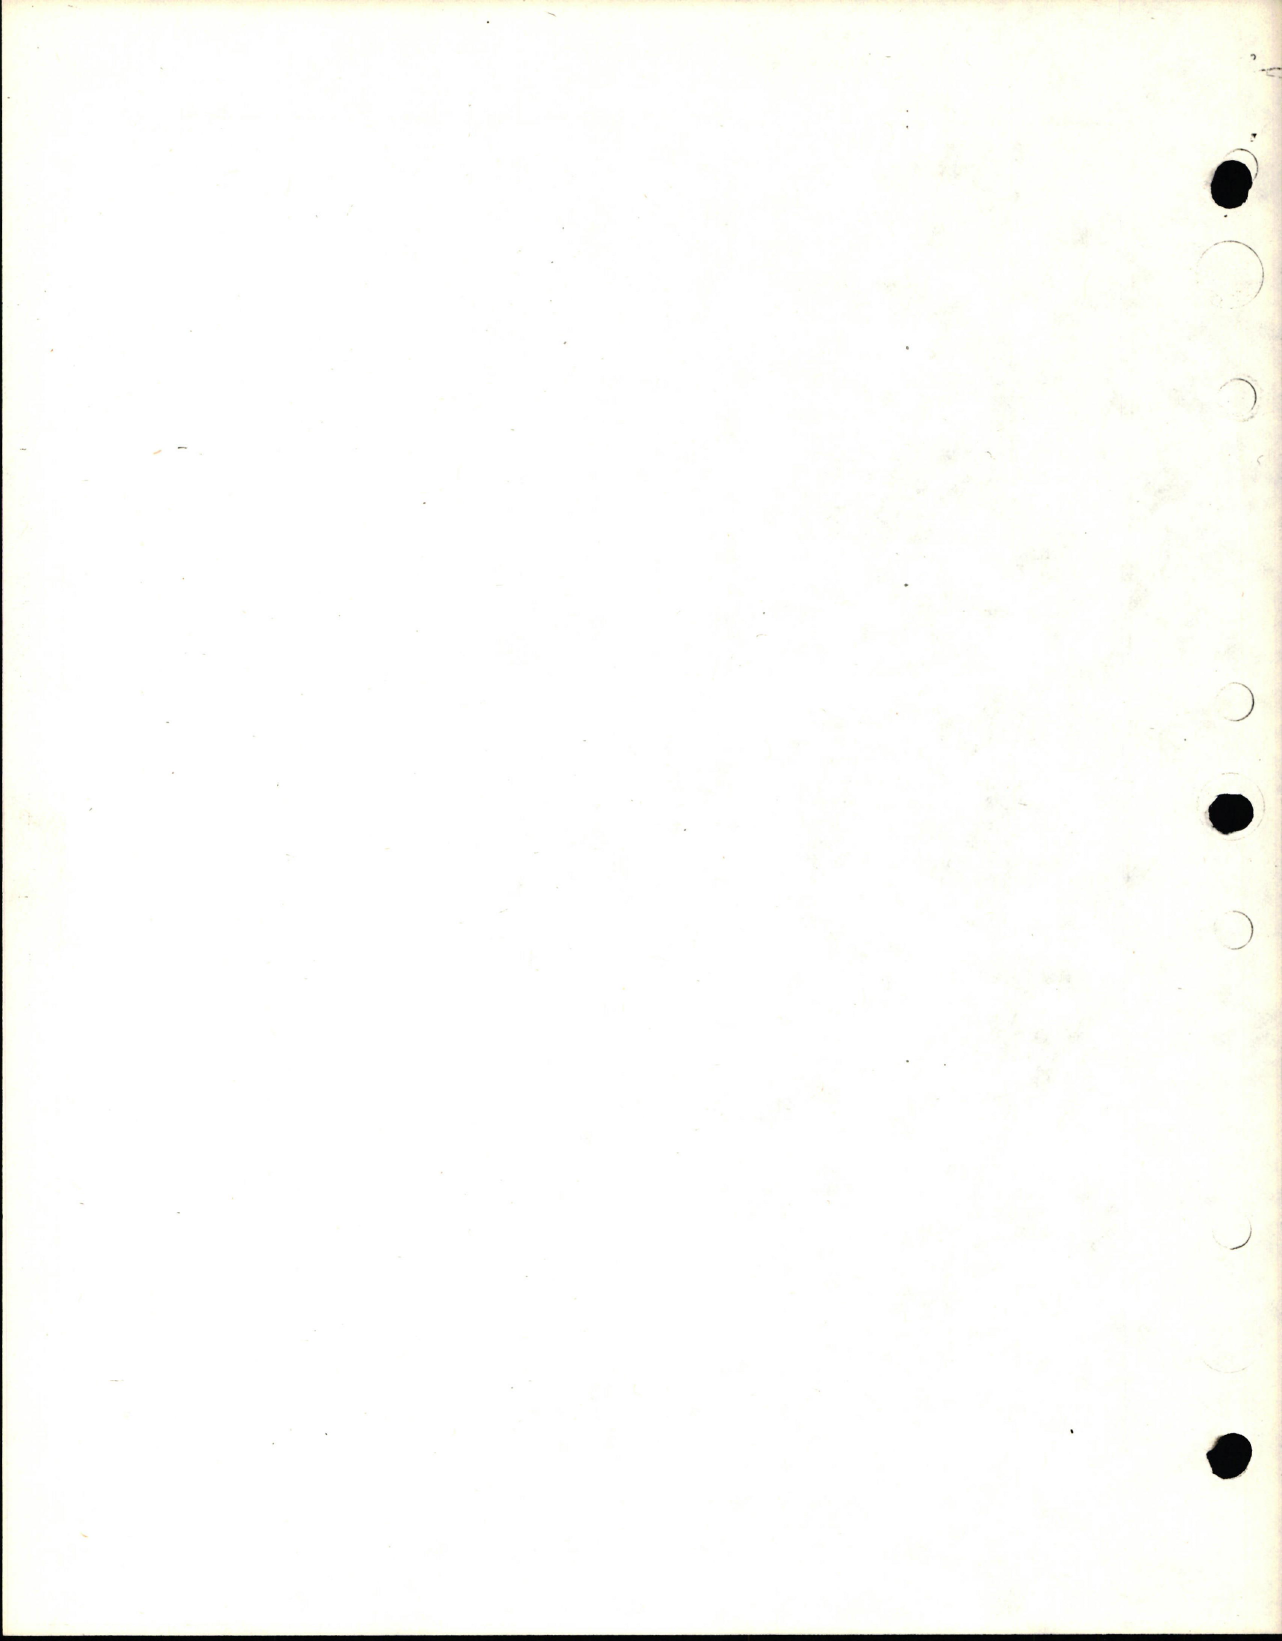 Sample page 5 from AirCorps Library document: Flight Manual for C-118A and VC-118A